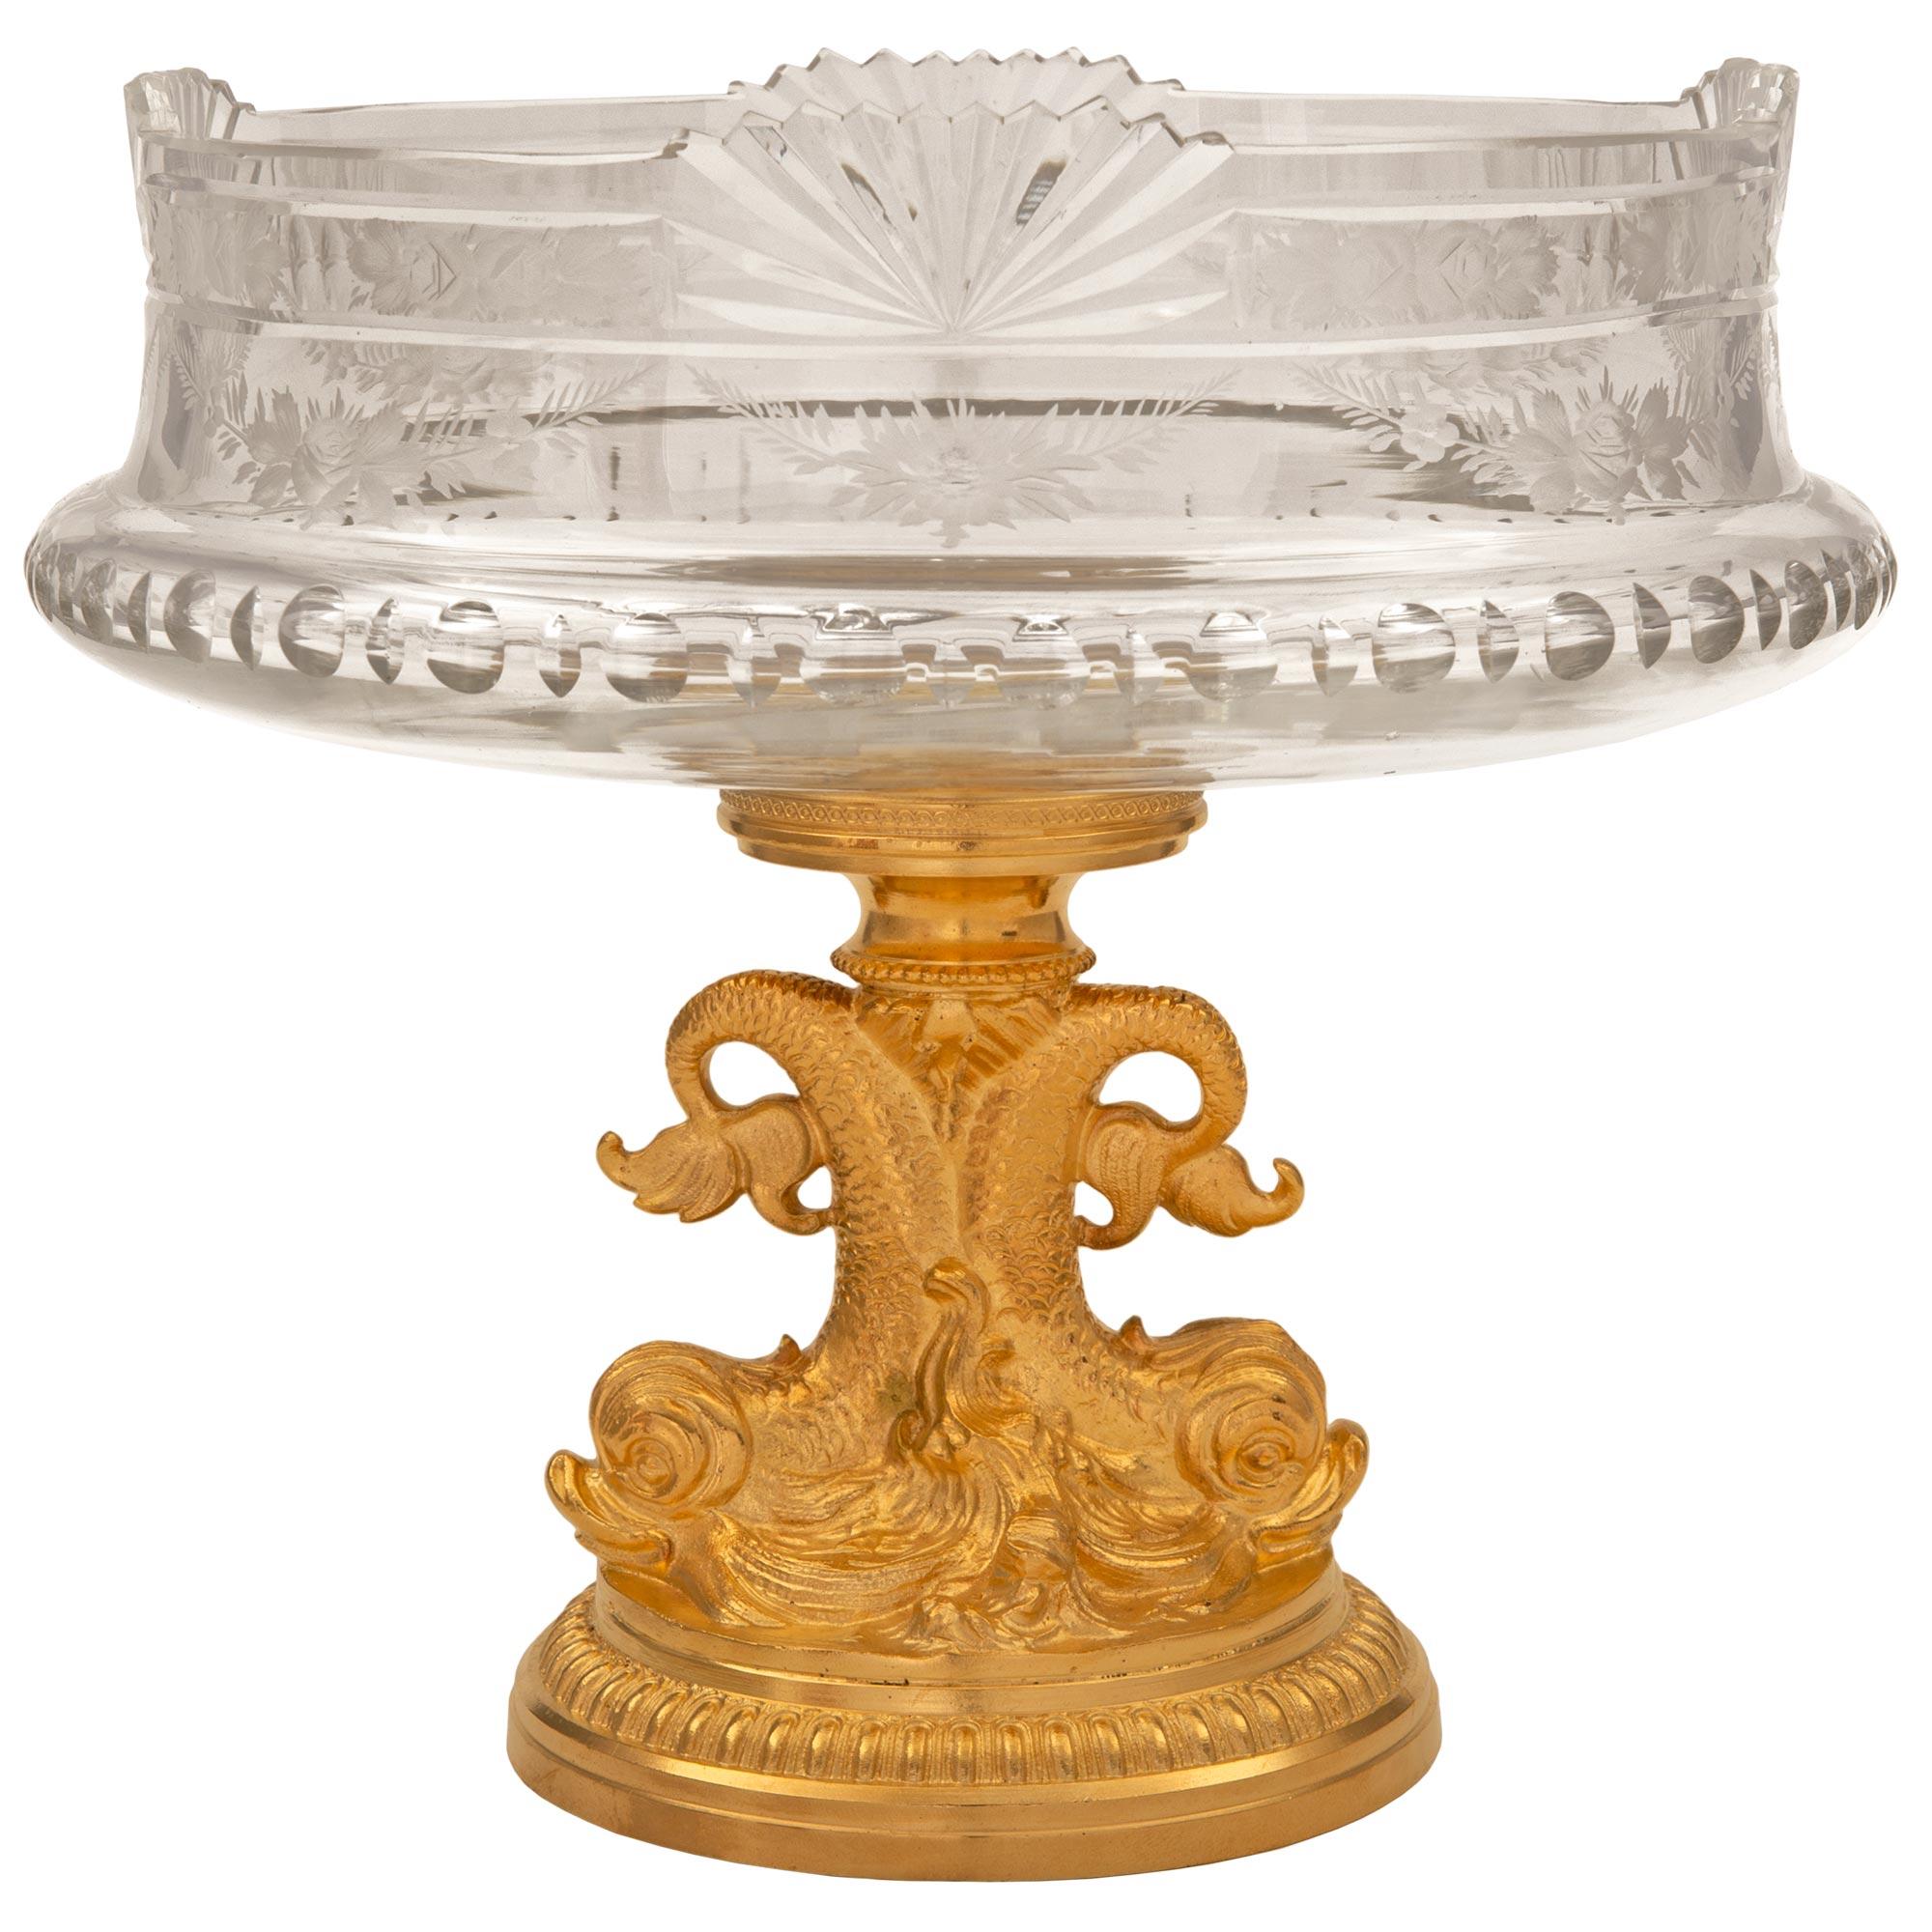 A French 19th Century Louis XVI St. Ormolu And Baccarat Crystal Centerpiece Bowl In Good Condition For Sale In West Palm Beach, FL